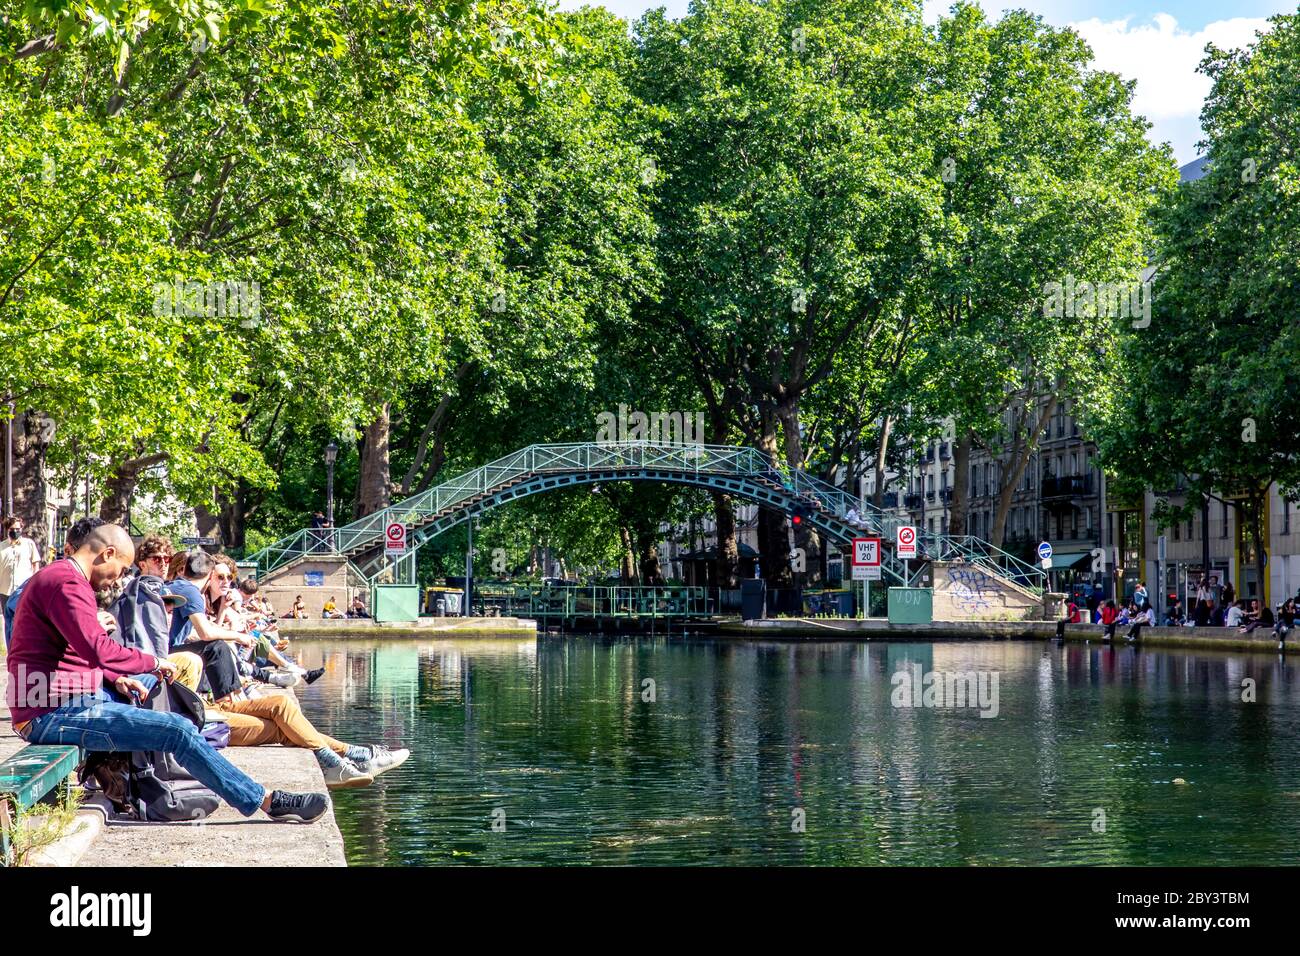 Paris, France - May 25, 2020: Street view of Saint Martin's canal, located in the french light-city, capital of France, Paris Stock Photo